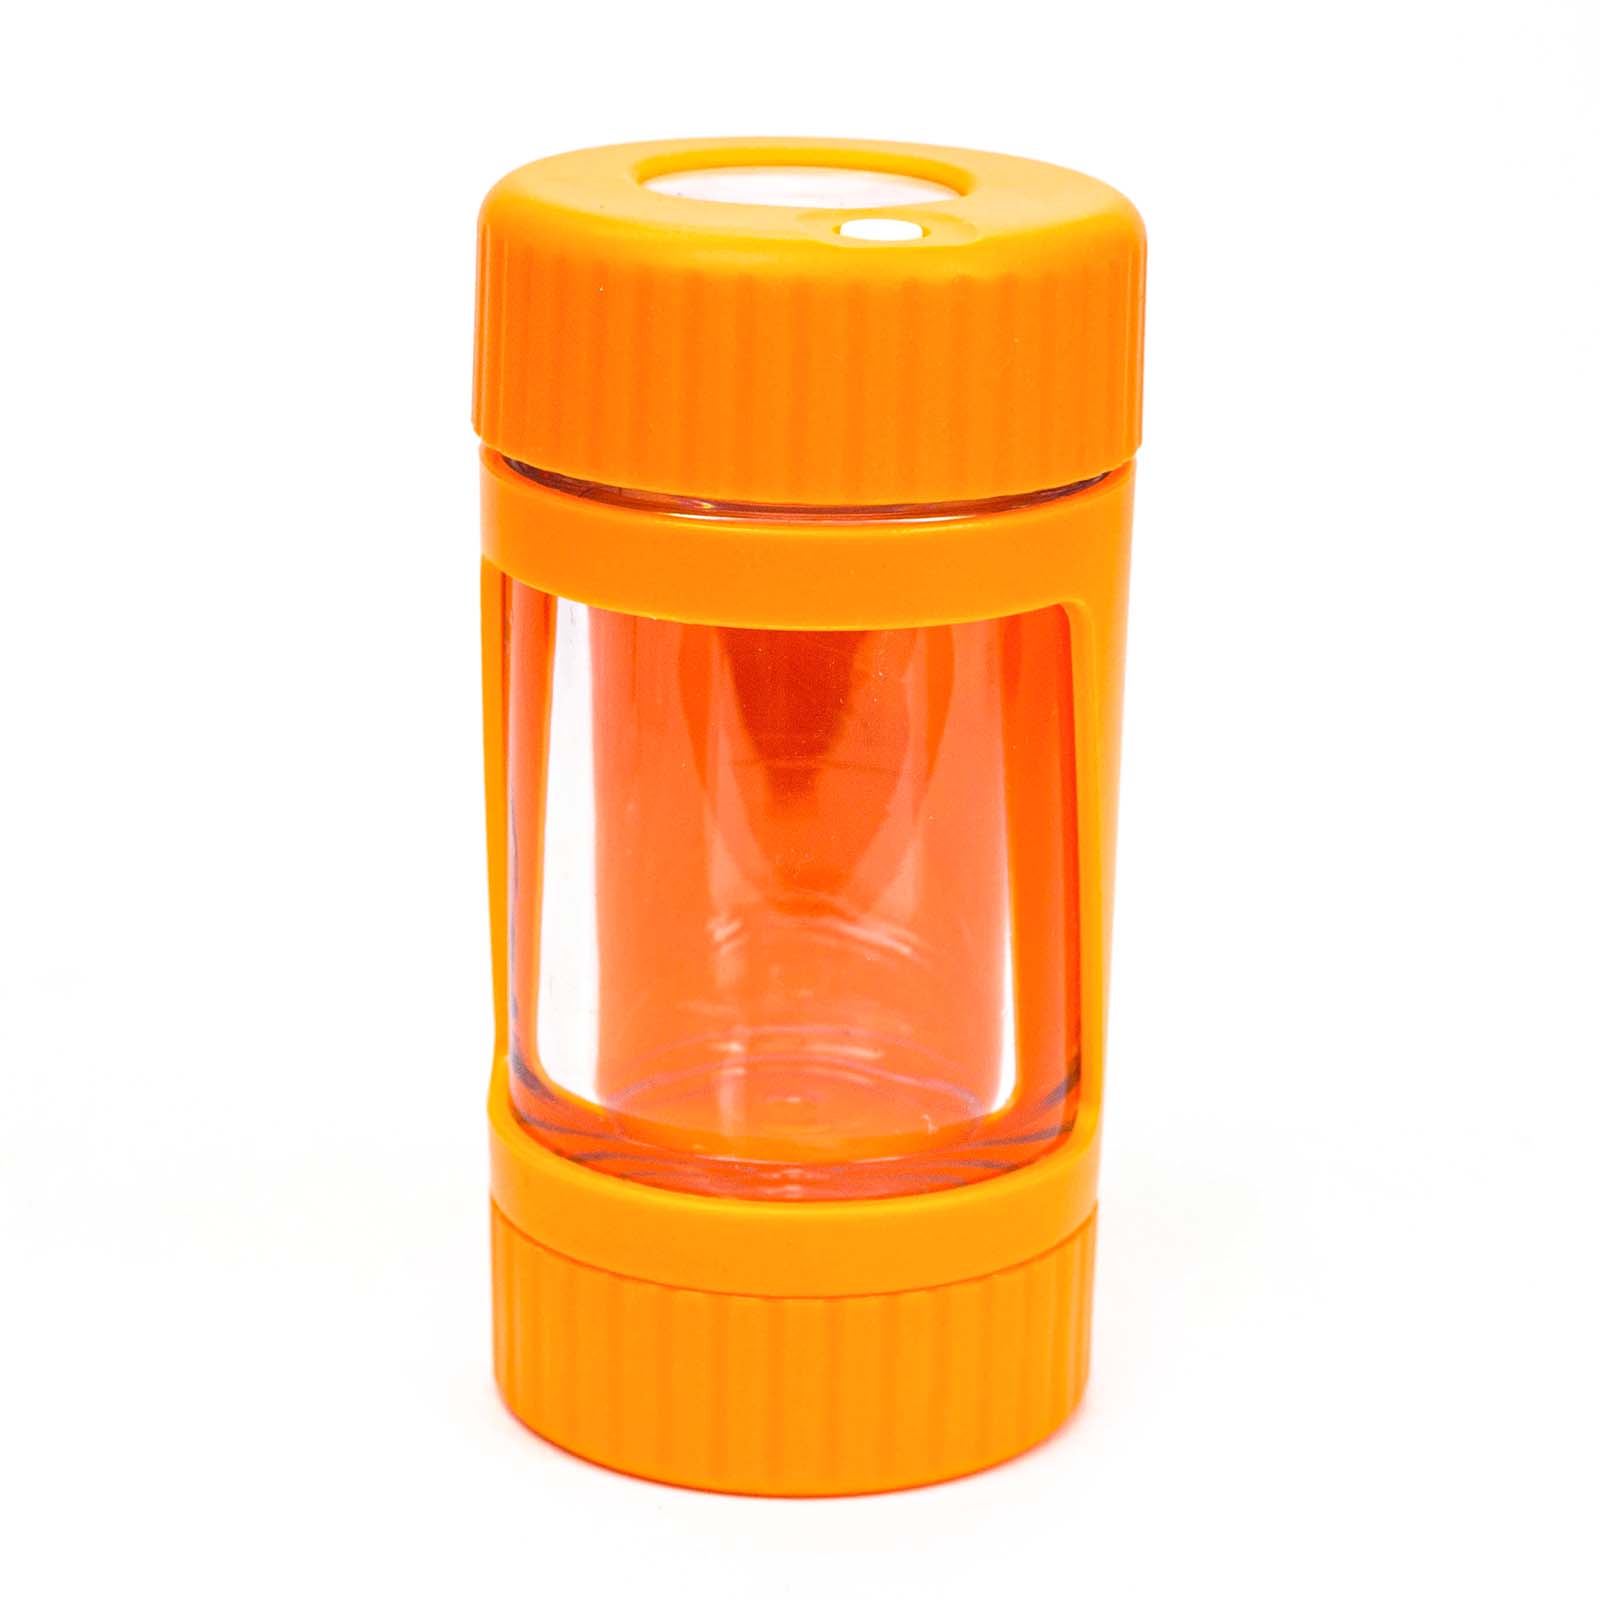 4-in-1 LED Magnify Jar with a grinder and one hitter Pilotdiary